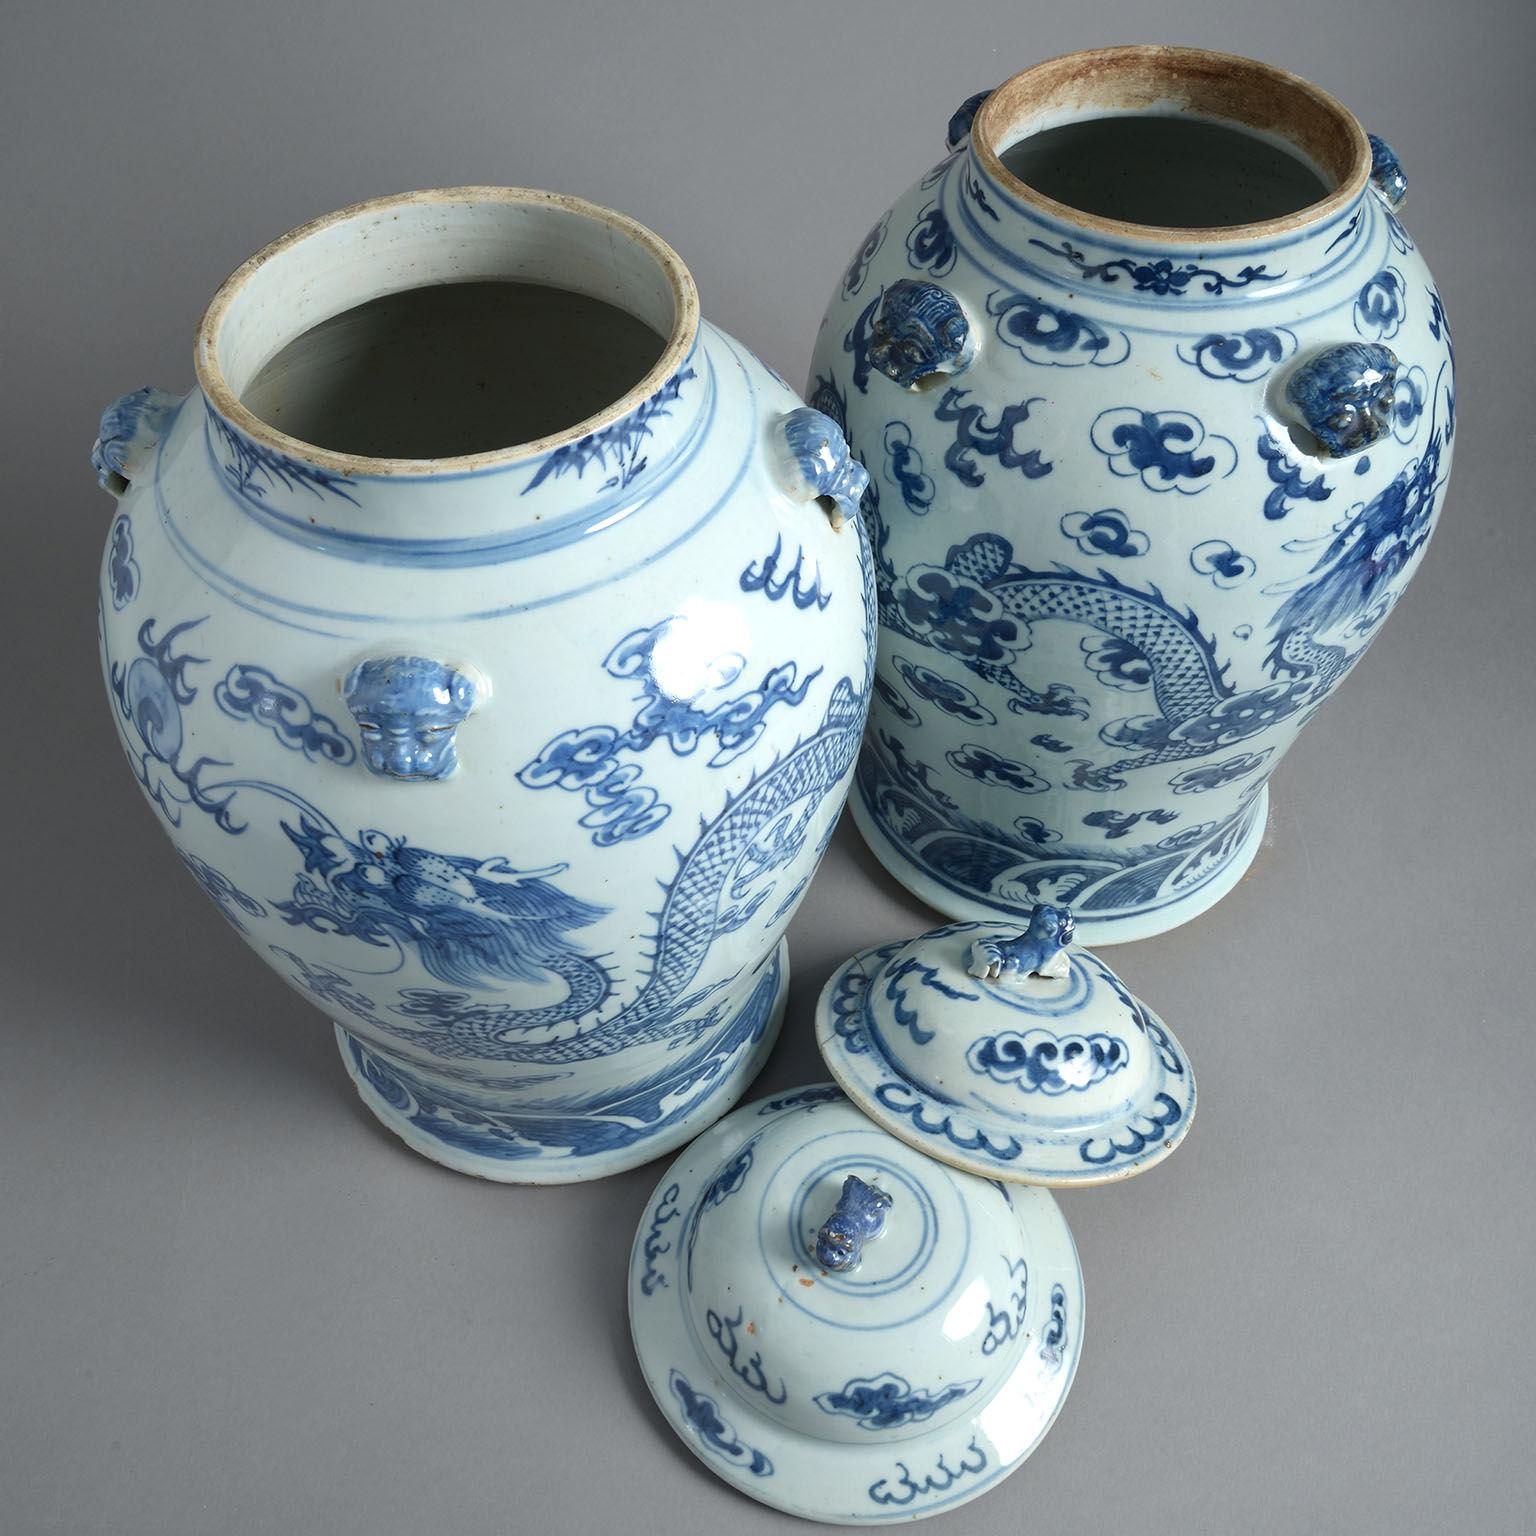 Late 19th Century Pair of Chinese Blue and White Porcelain Covered Jars or 